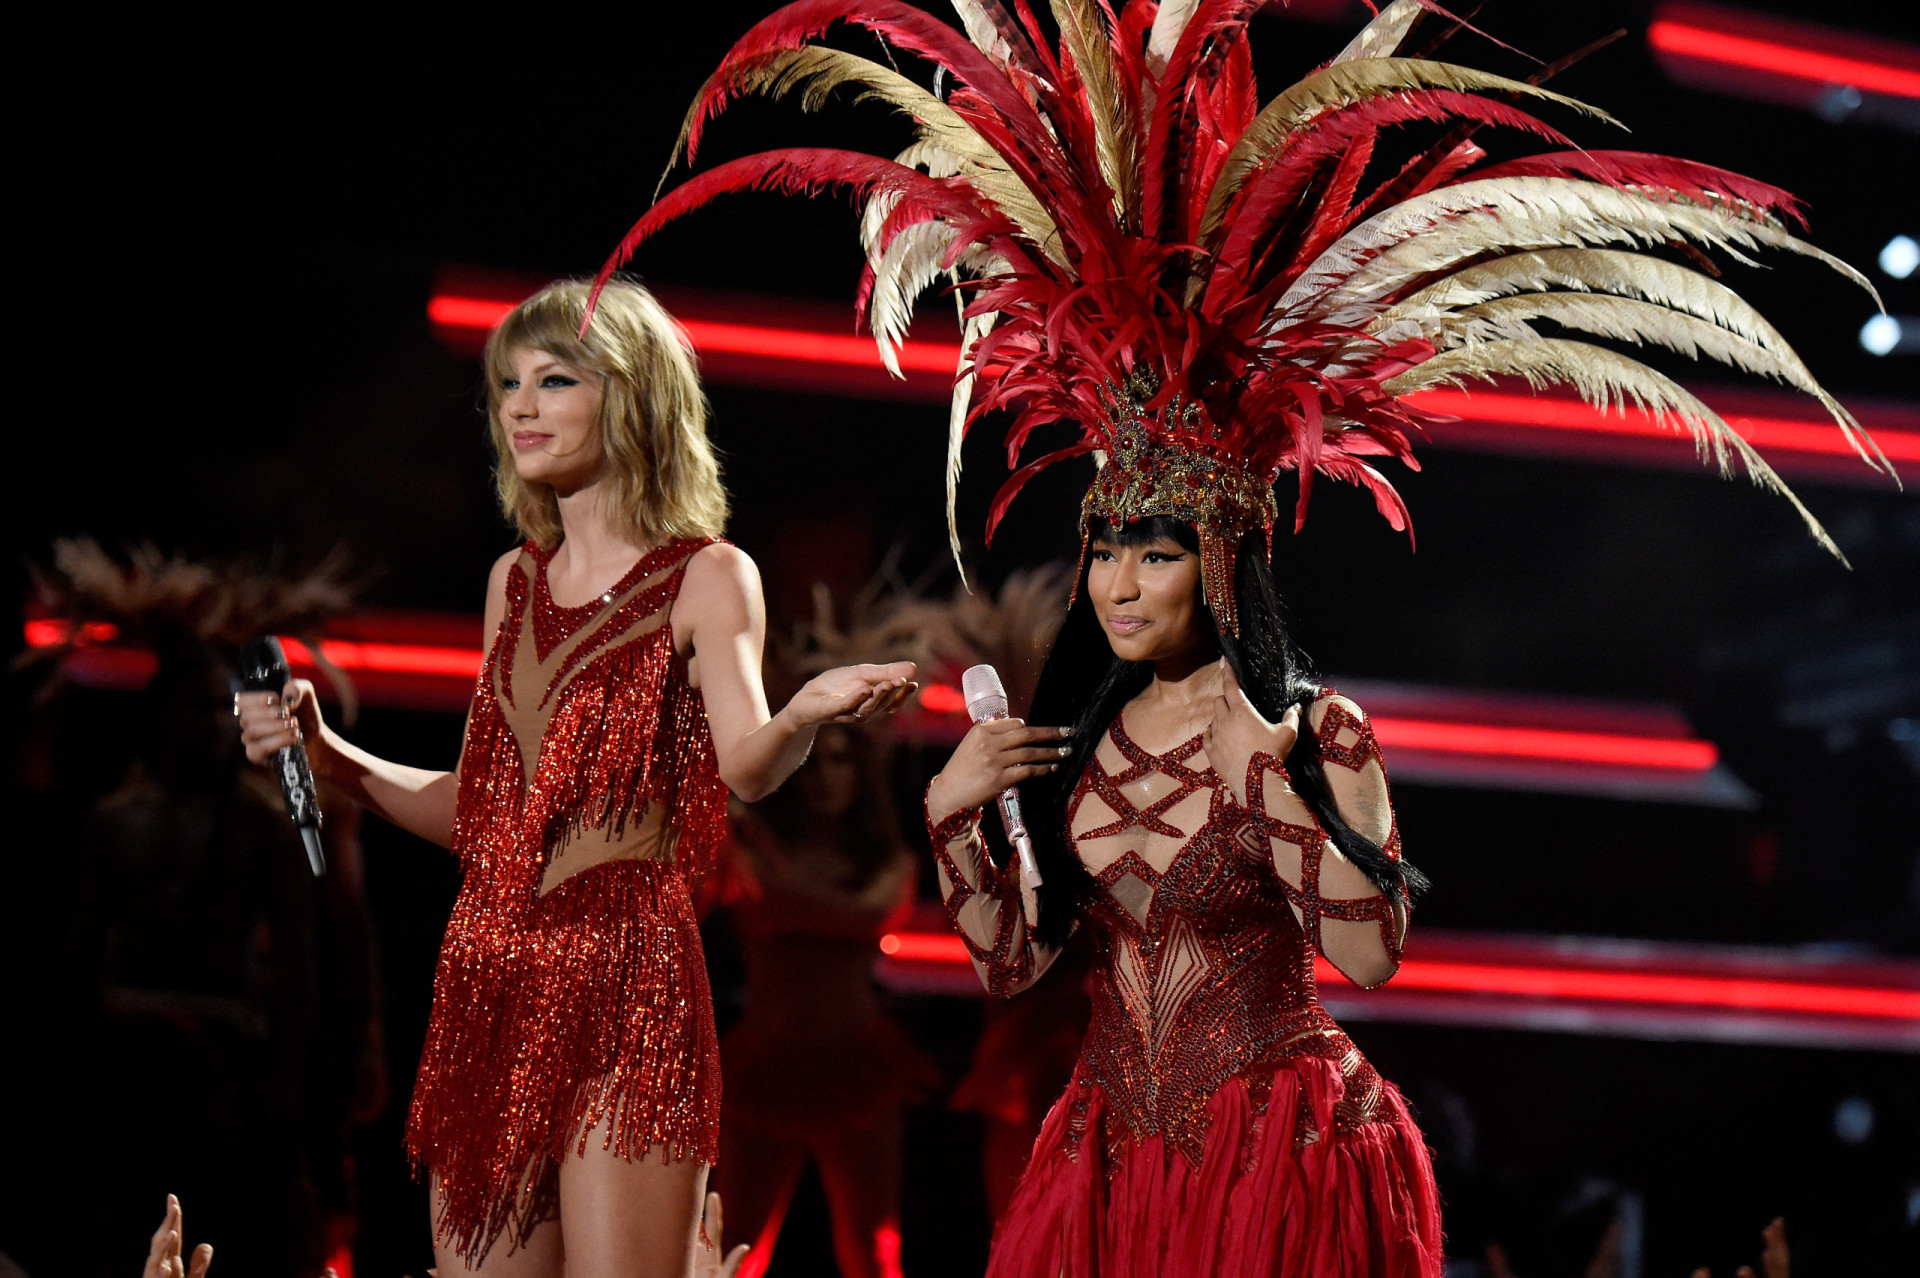 <p>In 2015, Nicki Minaj expressed her disappointment on Twitter after her music video was not awarded, indirectly mentioning Taylor Swift.</p>